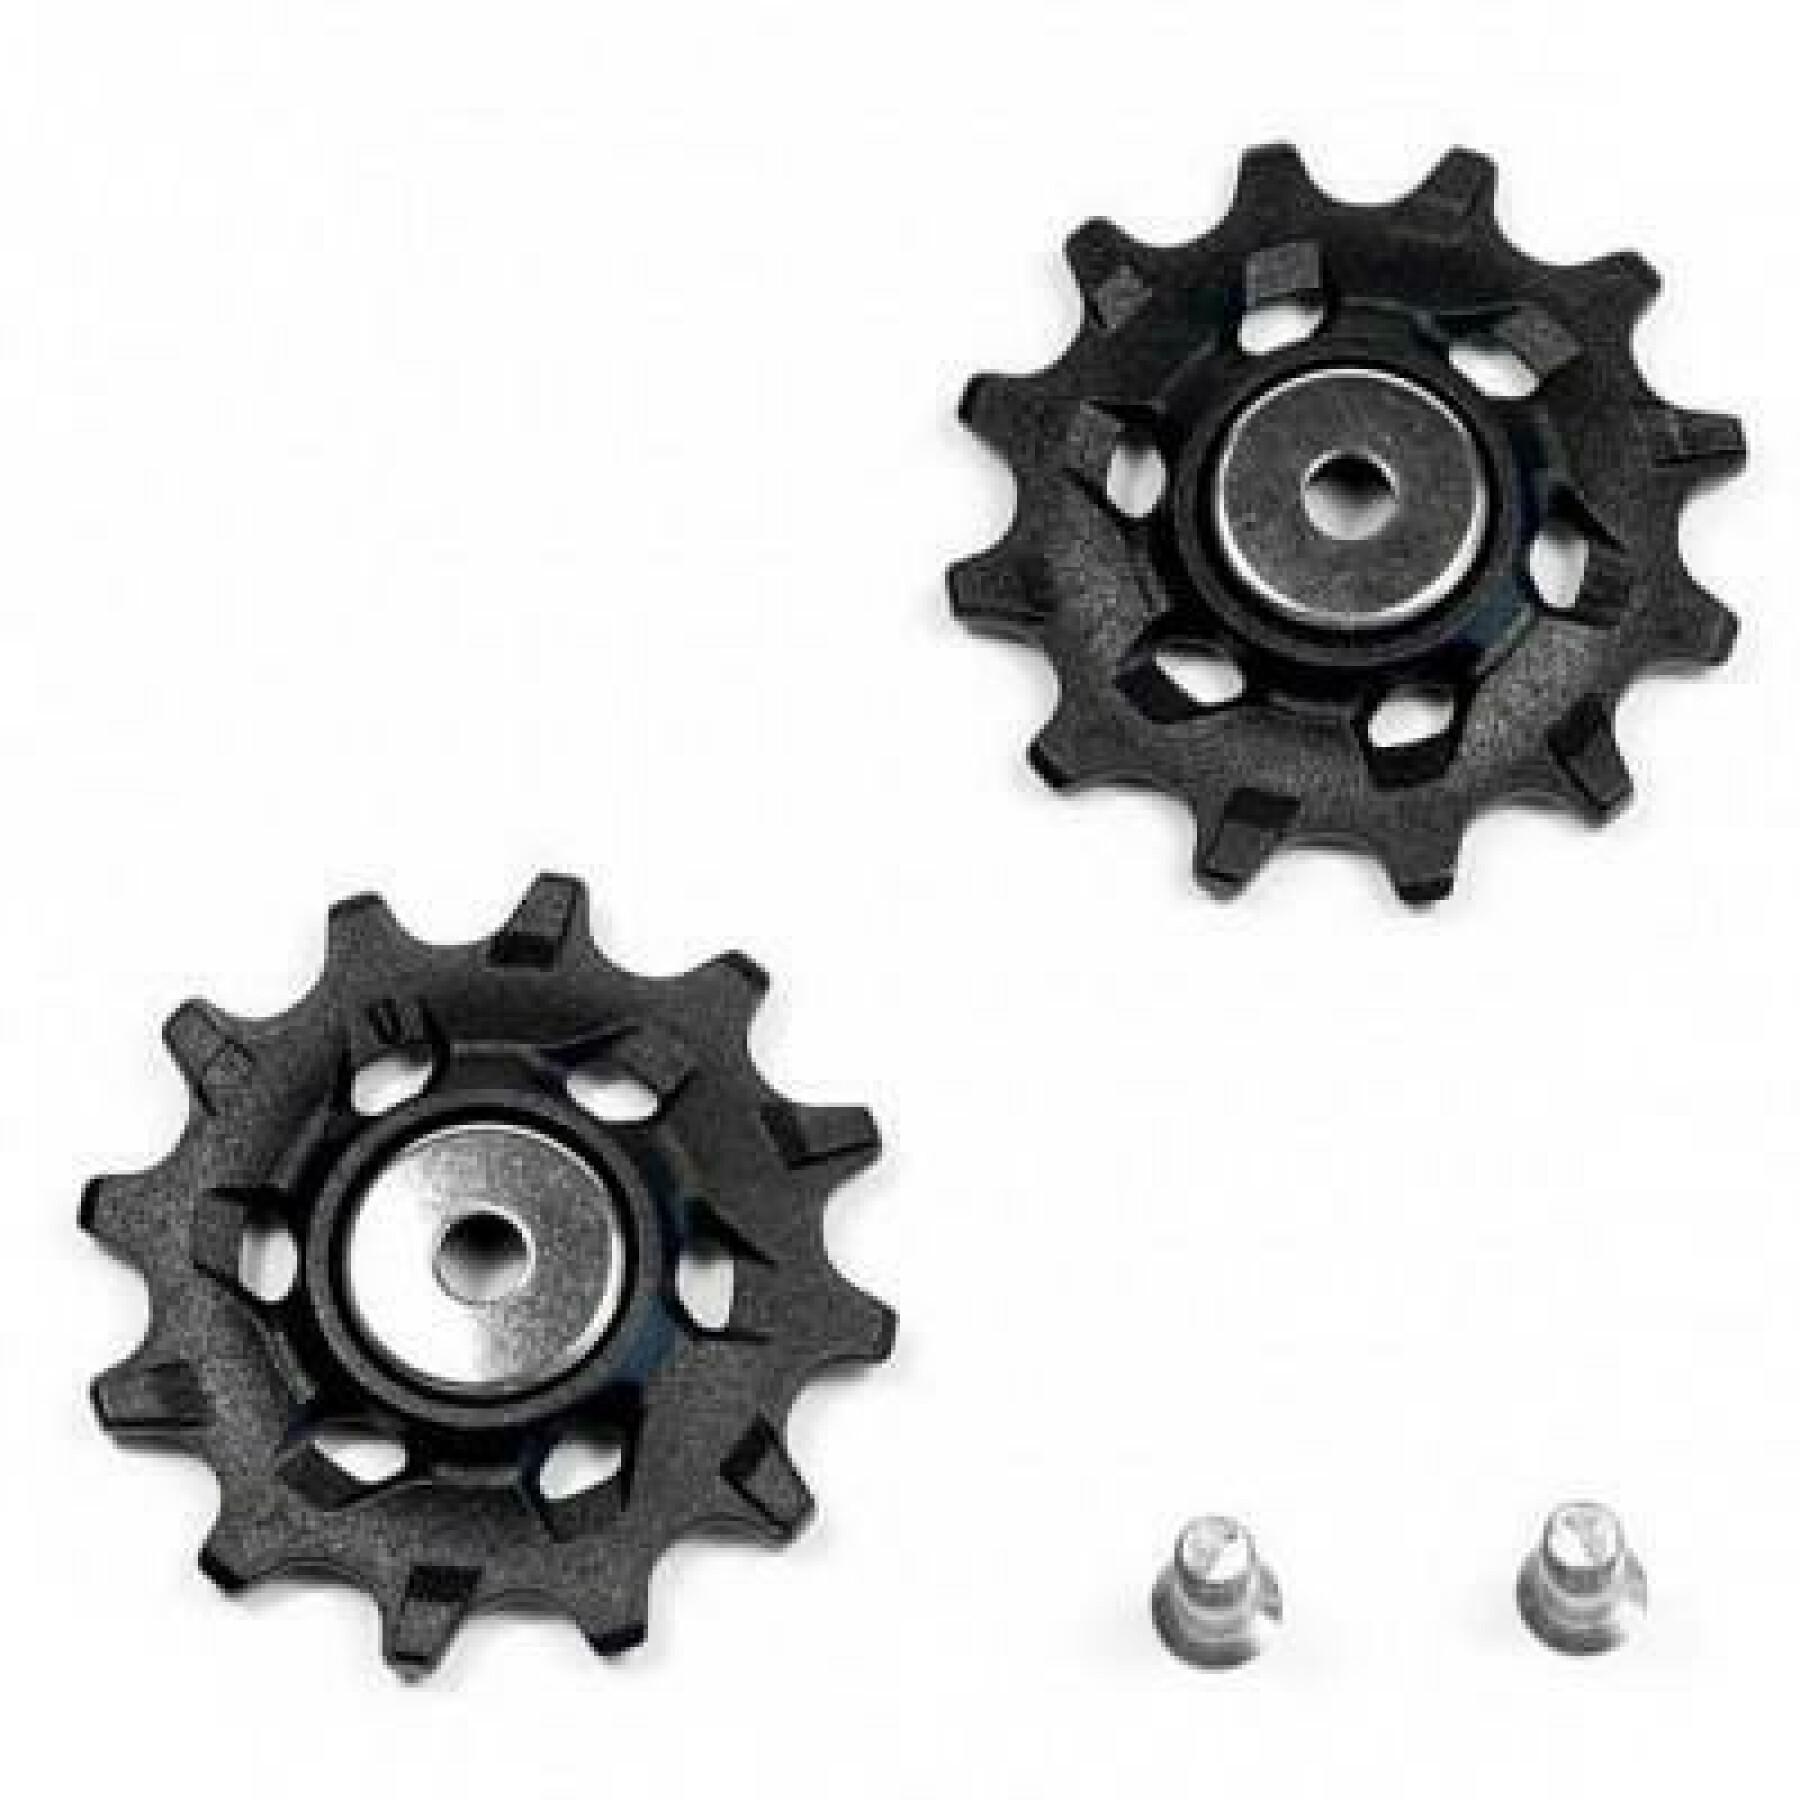 Rulle Sram Apex1/Nx Rd Pulley Kit